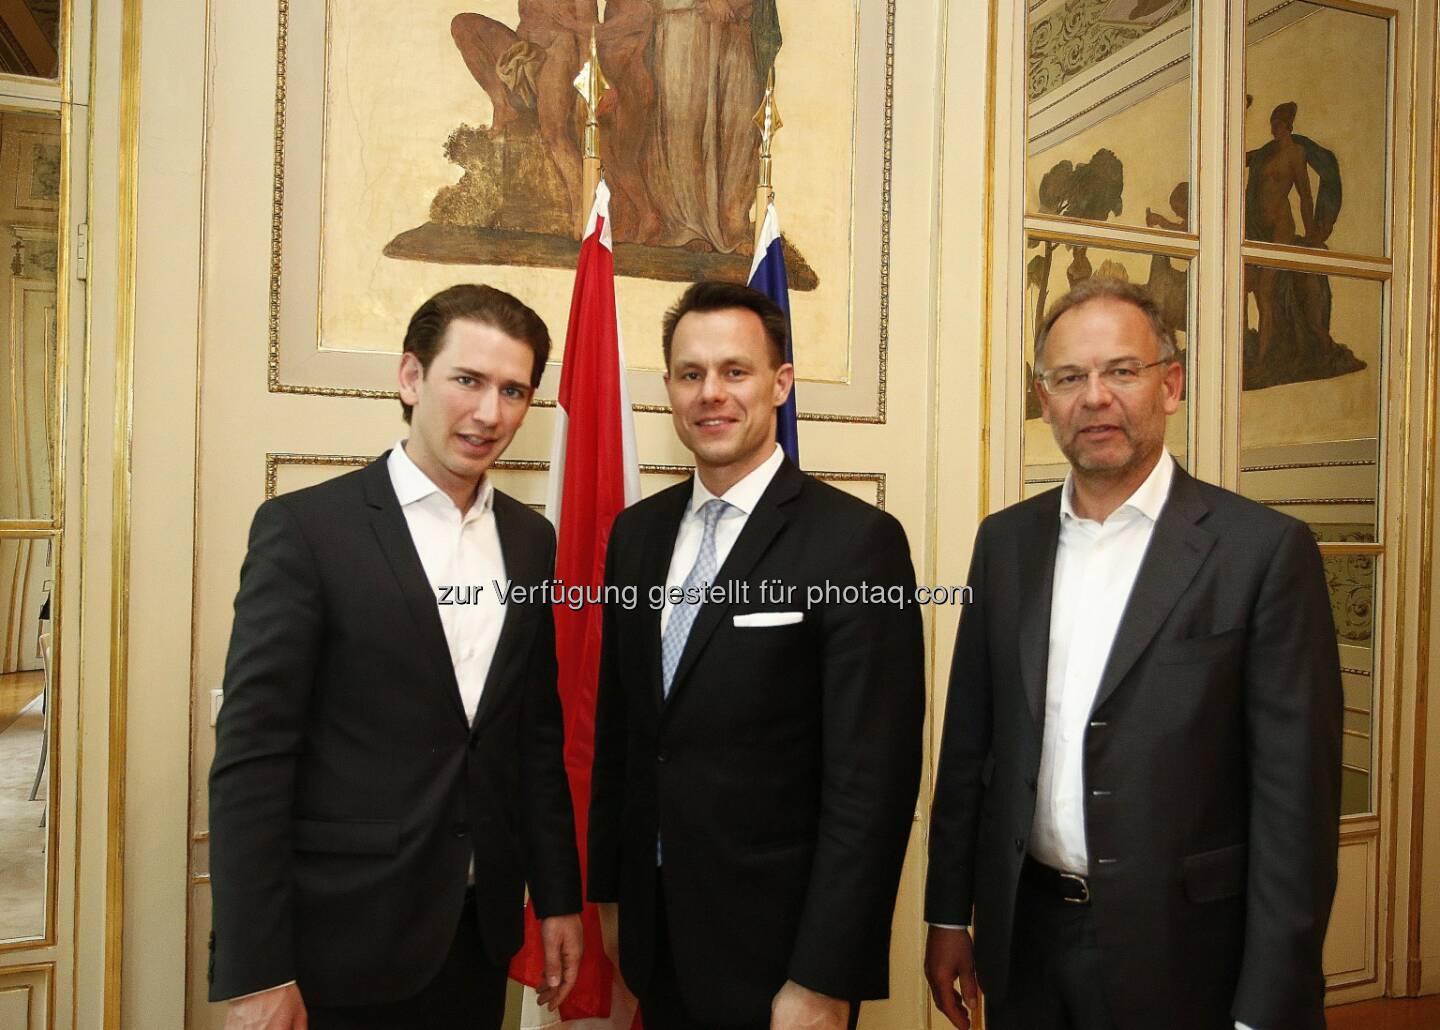 This week I met with the Austrian Foreign Minister Sebastian Kurz and Wienerberger AG CEO Heimo Scheuch at  Wiener Börse AG. We had a fruitful discussion on the Austrian financial market. It is proven that markets with advanced investment cultures have faster, more sustainable growth and recover faster from crises. Thanks a lot for stopping by!